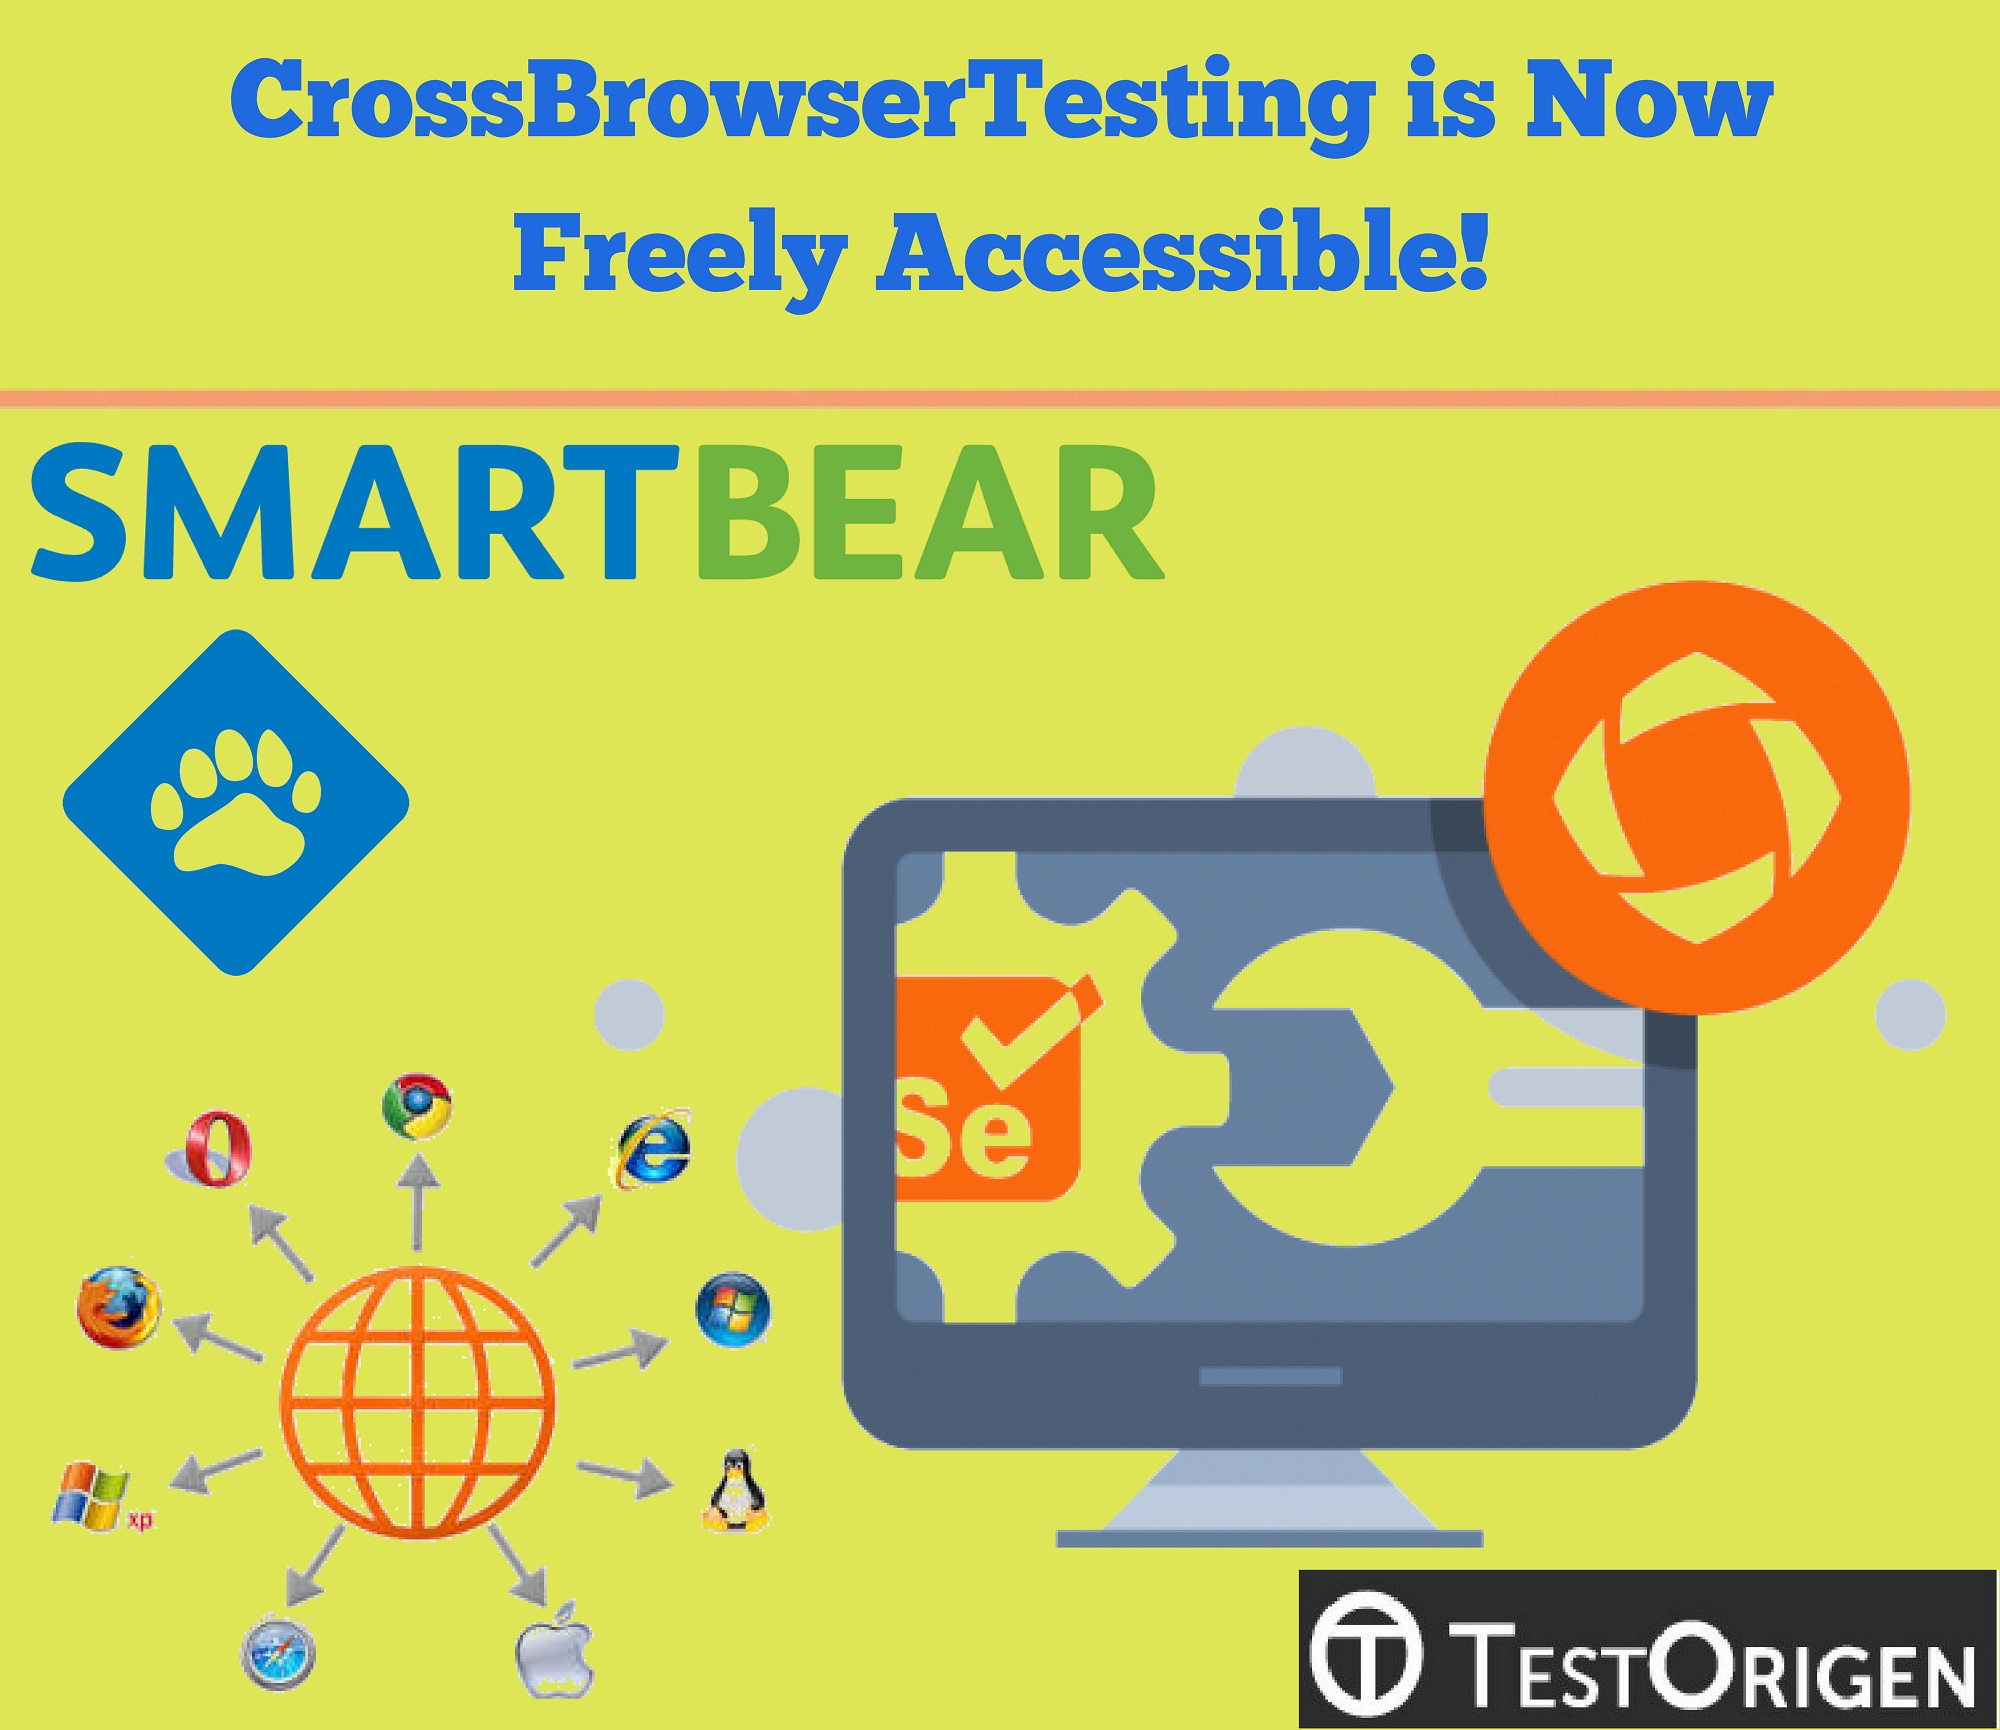 CrossBrowserTesting is Now Freely Accessible. open source cross browser testing tools